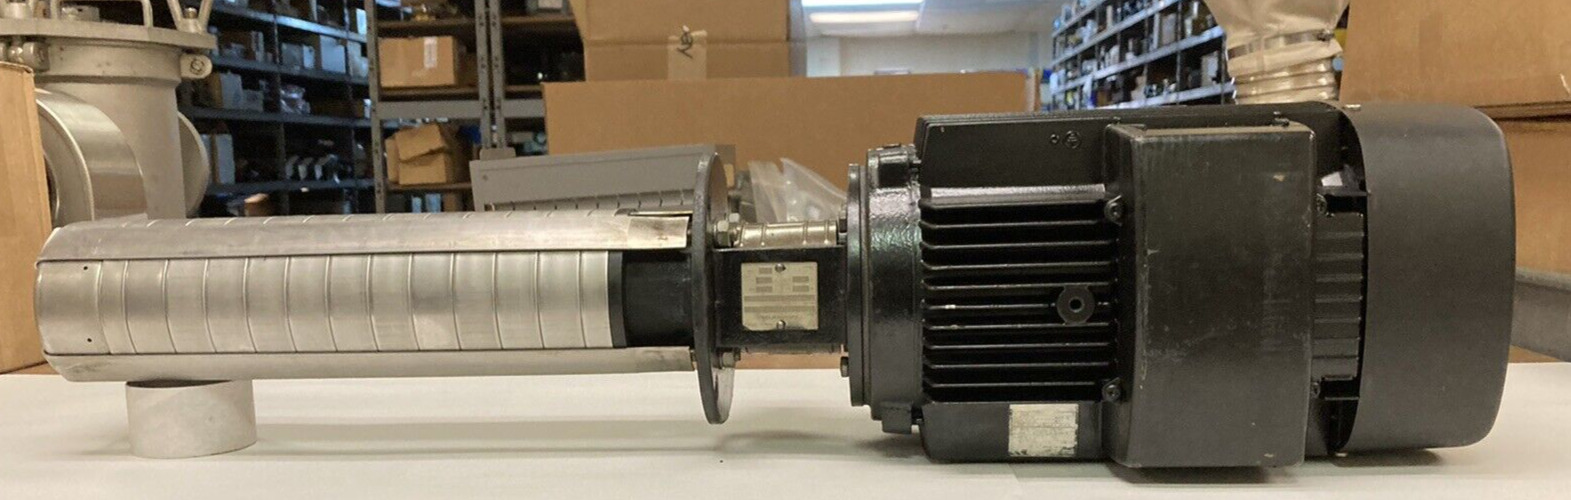 Grundfos,CRK 4-120 A-W-A-AUUV,Immersible Multistage Pump